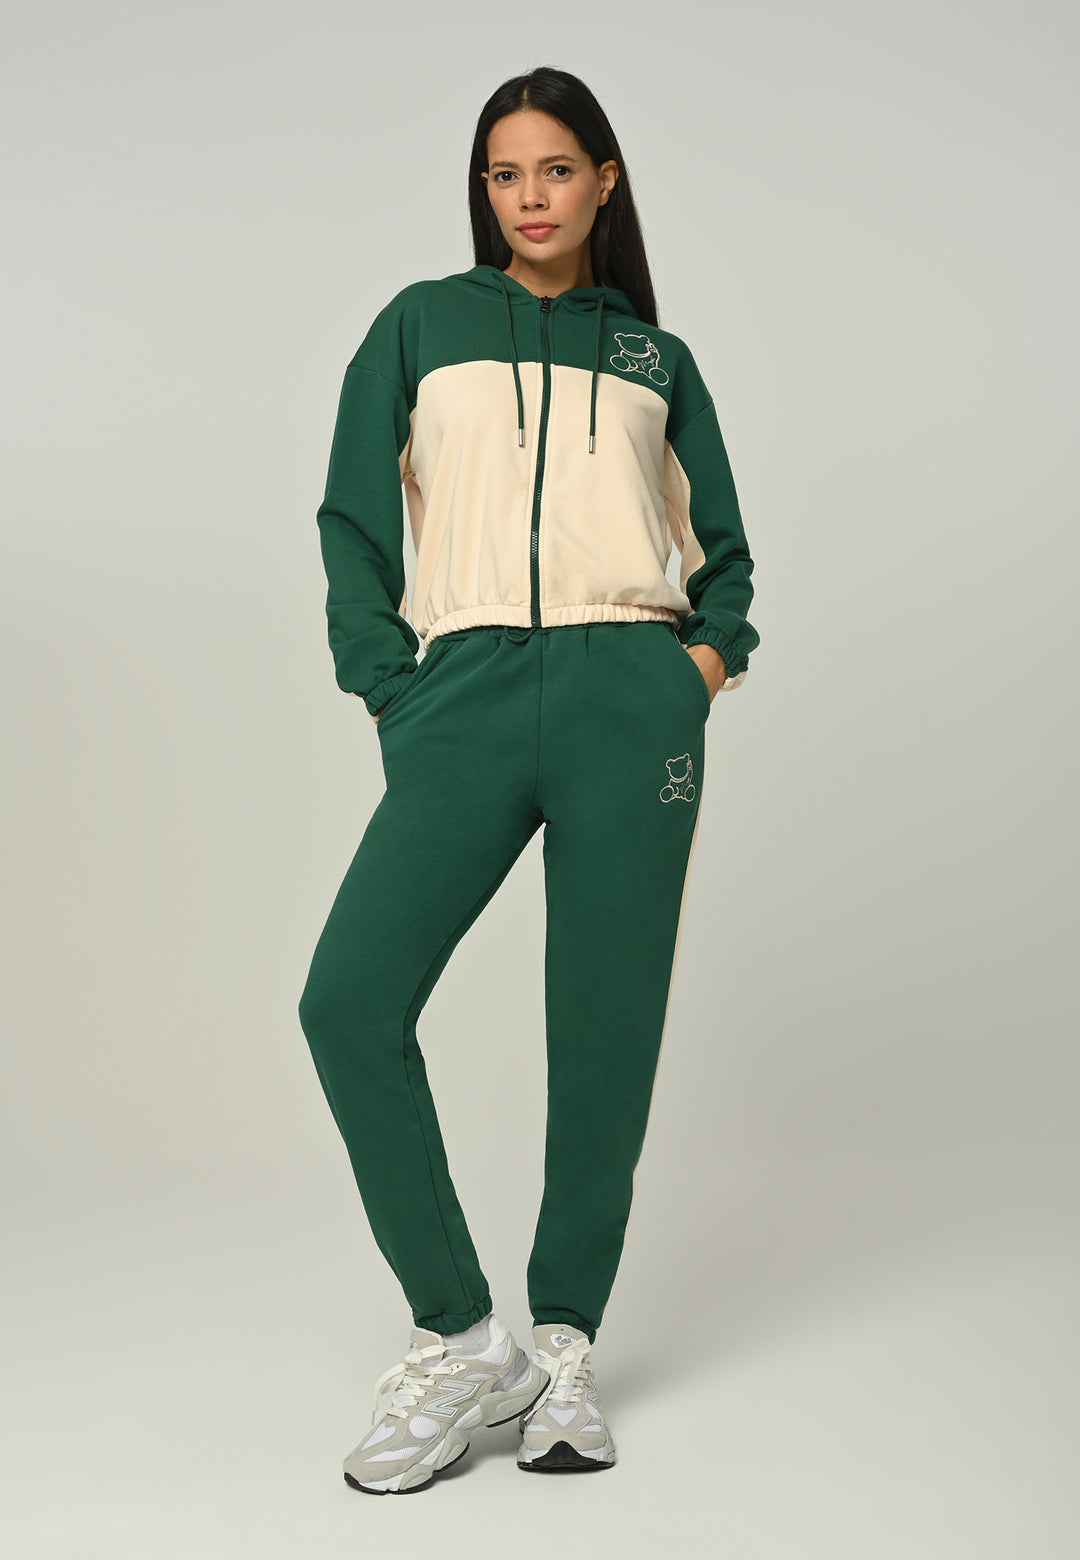 Cuddly Bear Embroidered Zip-Up Women's Tracksuit